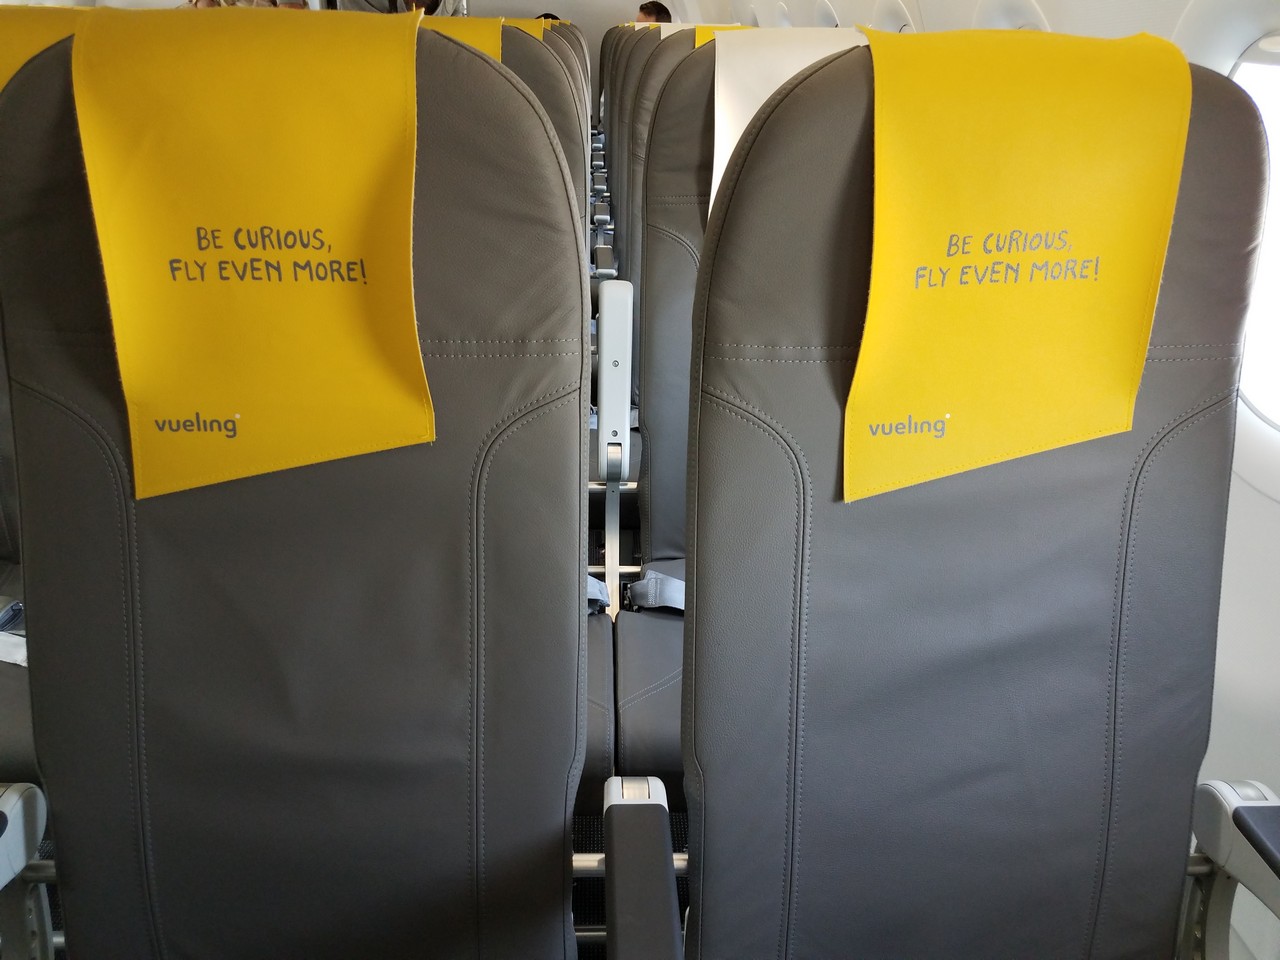 a row of seats with yellow and grey signs